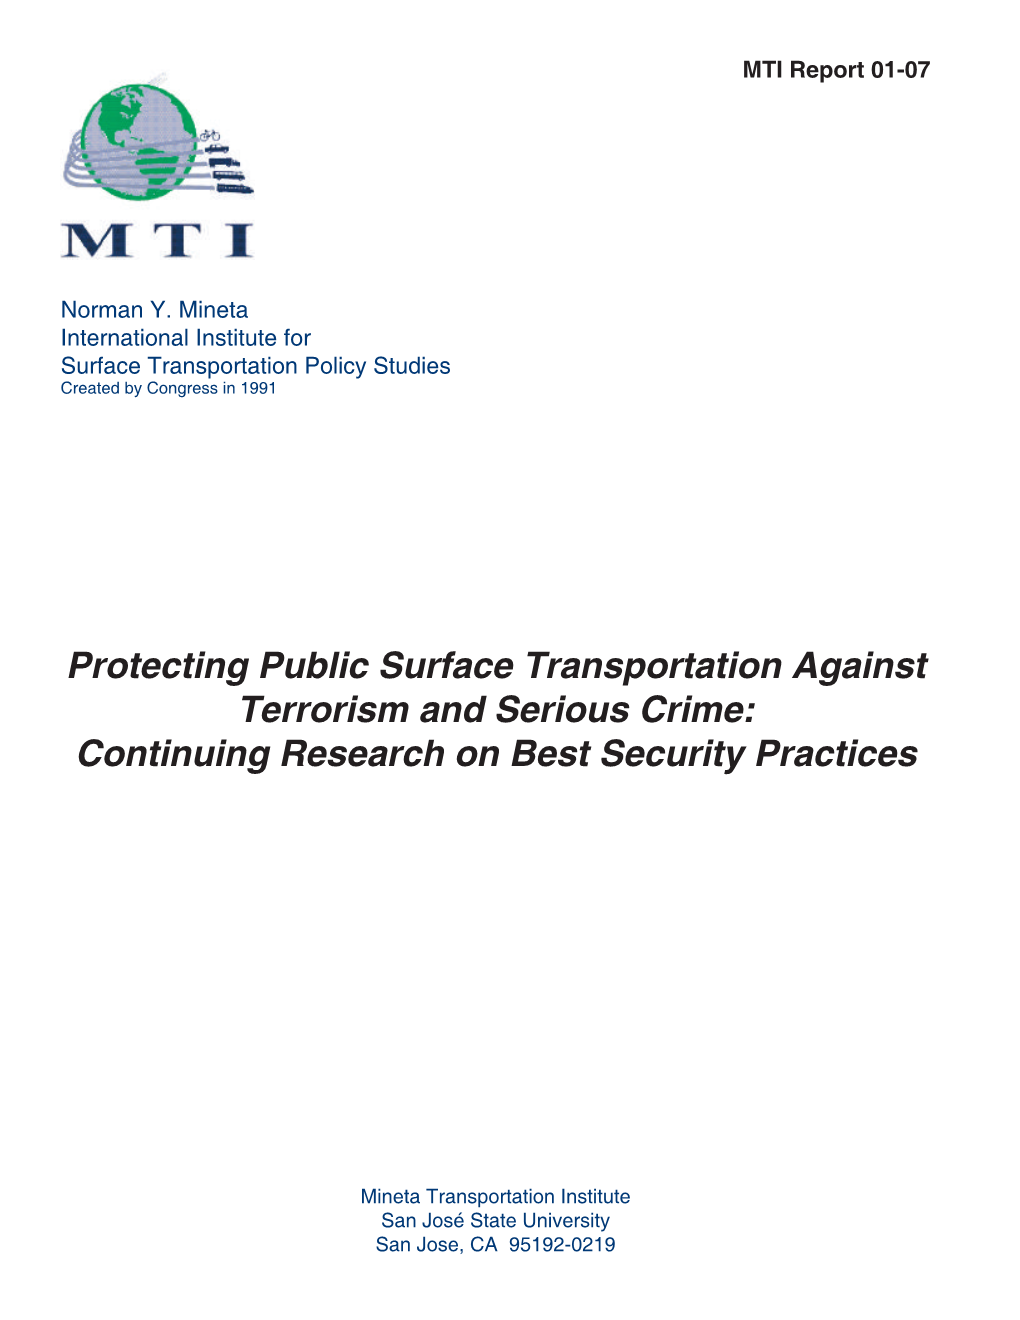 Protecting Public Surface Transportation Against Terrorism and Serious Crime: Continuing Research on Best Security Practices